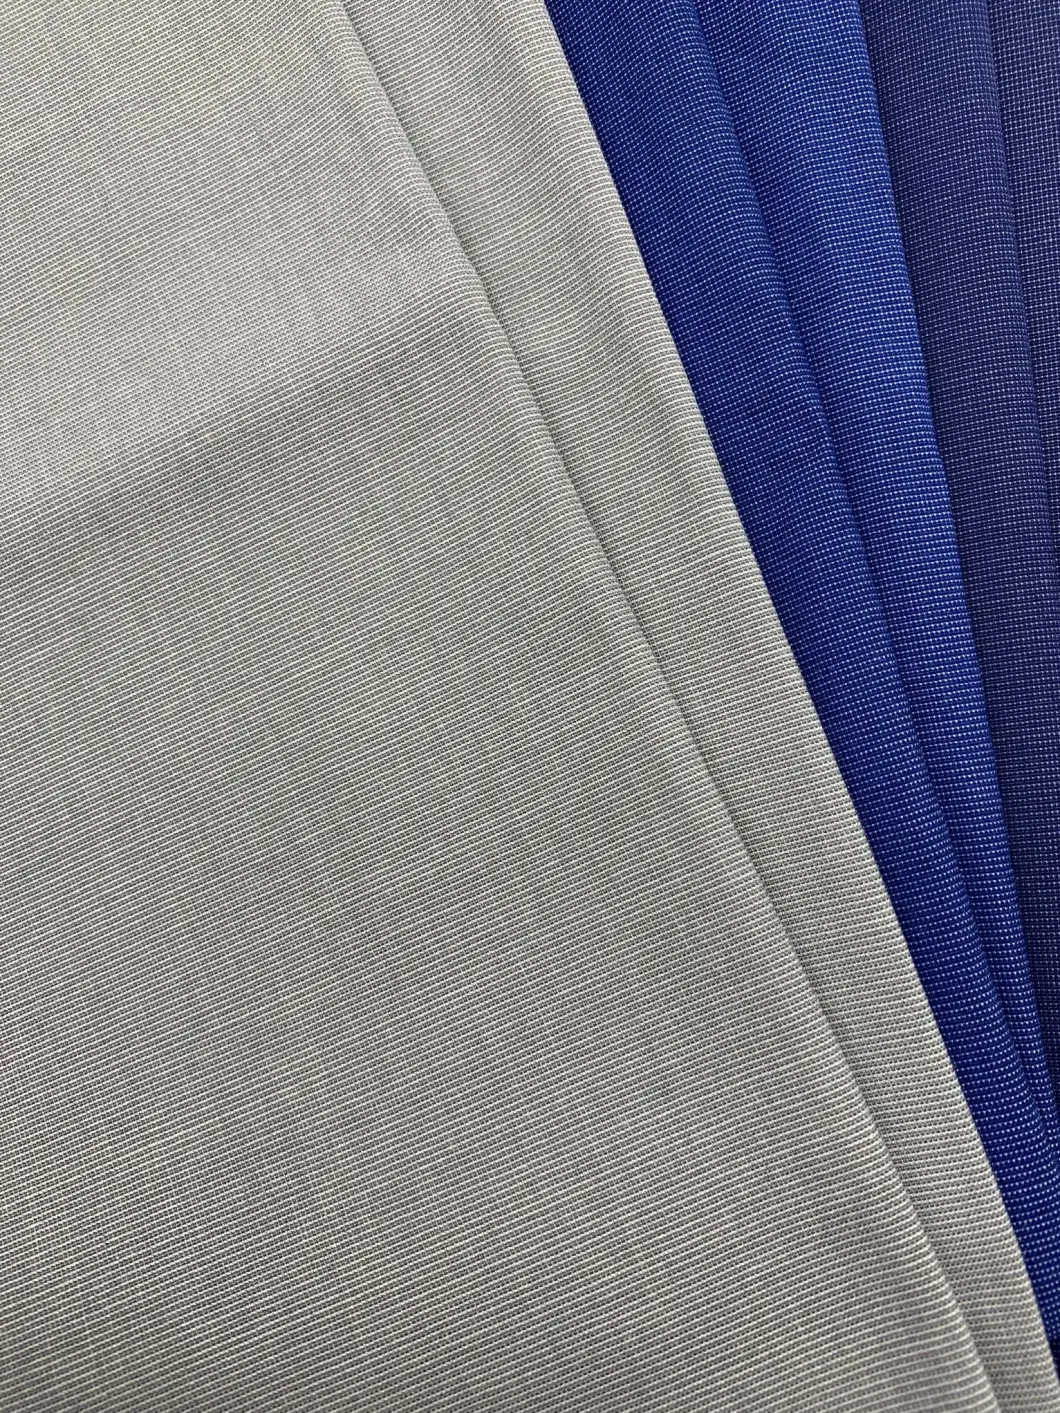 Lightweight Cotton or Polyester Waterproof Fireproof Suit Fabric for Jacket Twill